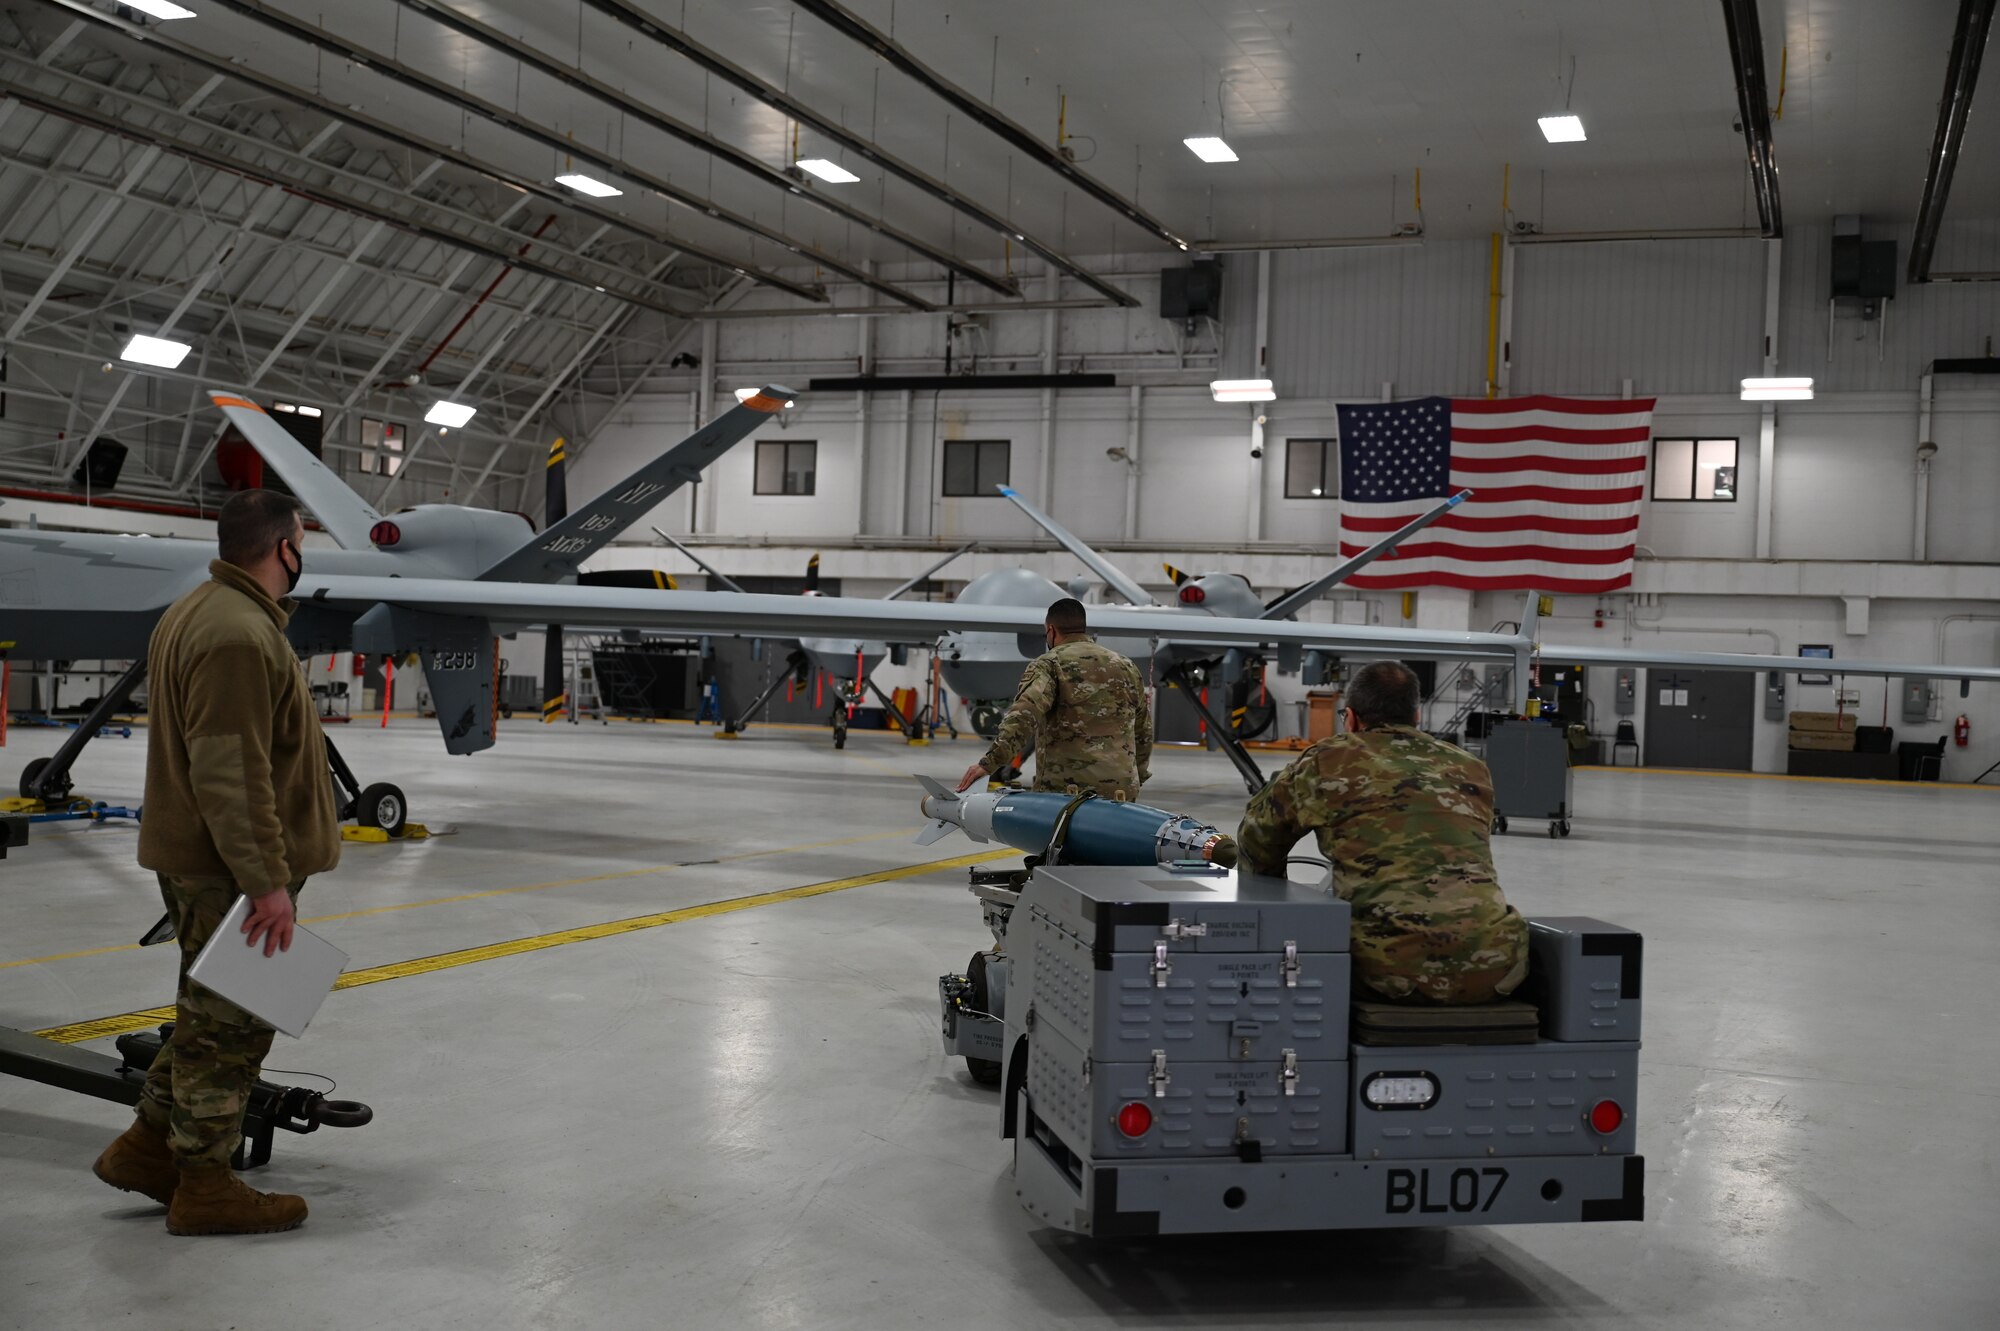 Airmen from the 174th Maintenance Group line up an inert bomb for installation for a training mission on Hancock Field Air Force Base, New York on February 8, 2022. This is a requirement aimed to keep weapon load crews proficient in their jobs. (U.S. Air National Guard photo by Master Sgt. Barbara Olney)